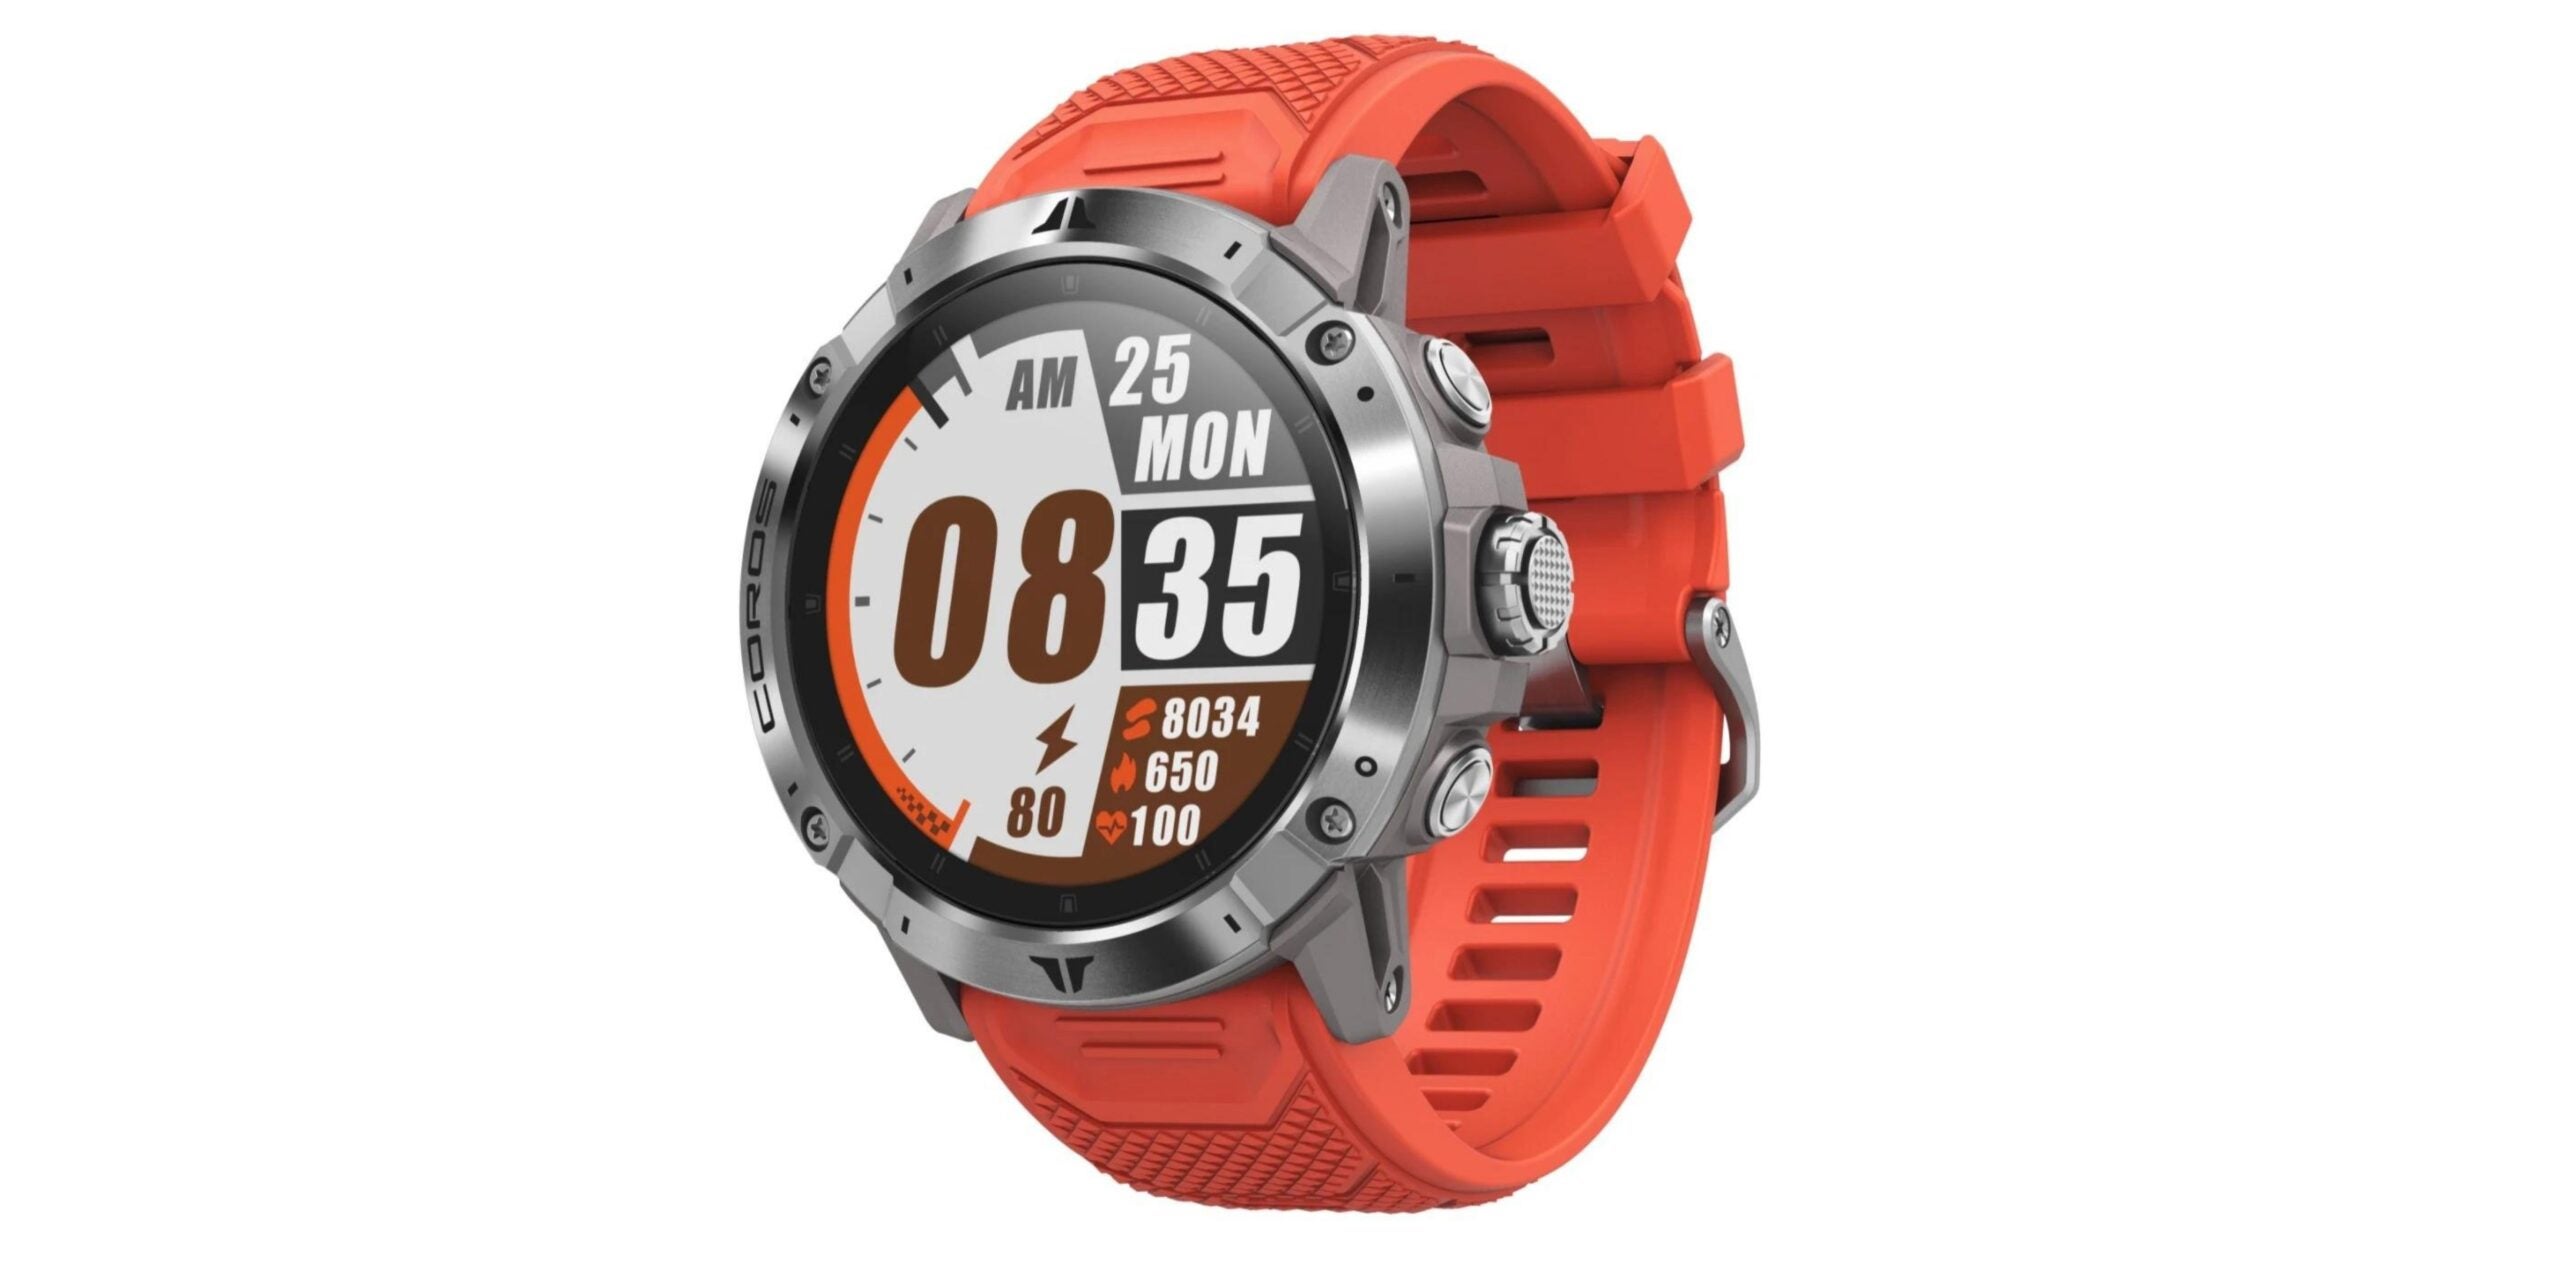 BEAR GRYLLS AND LUMINOX OUTDOOR ADVENTURE WATCHES PUSH THE LIMIT FOR  SURVIVAL - 123 DESIGN BLOG